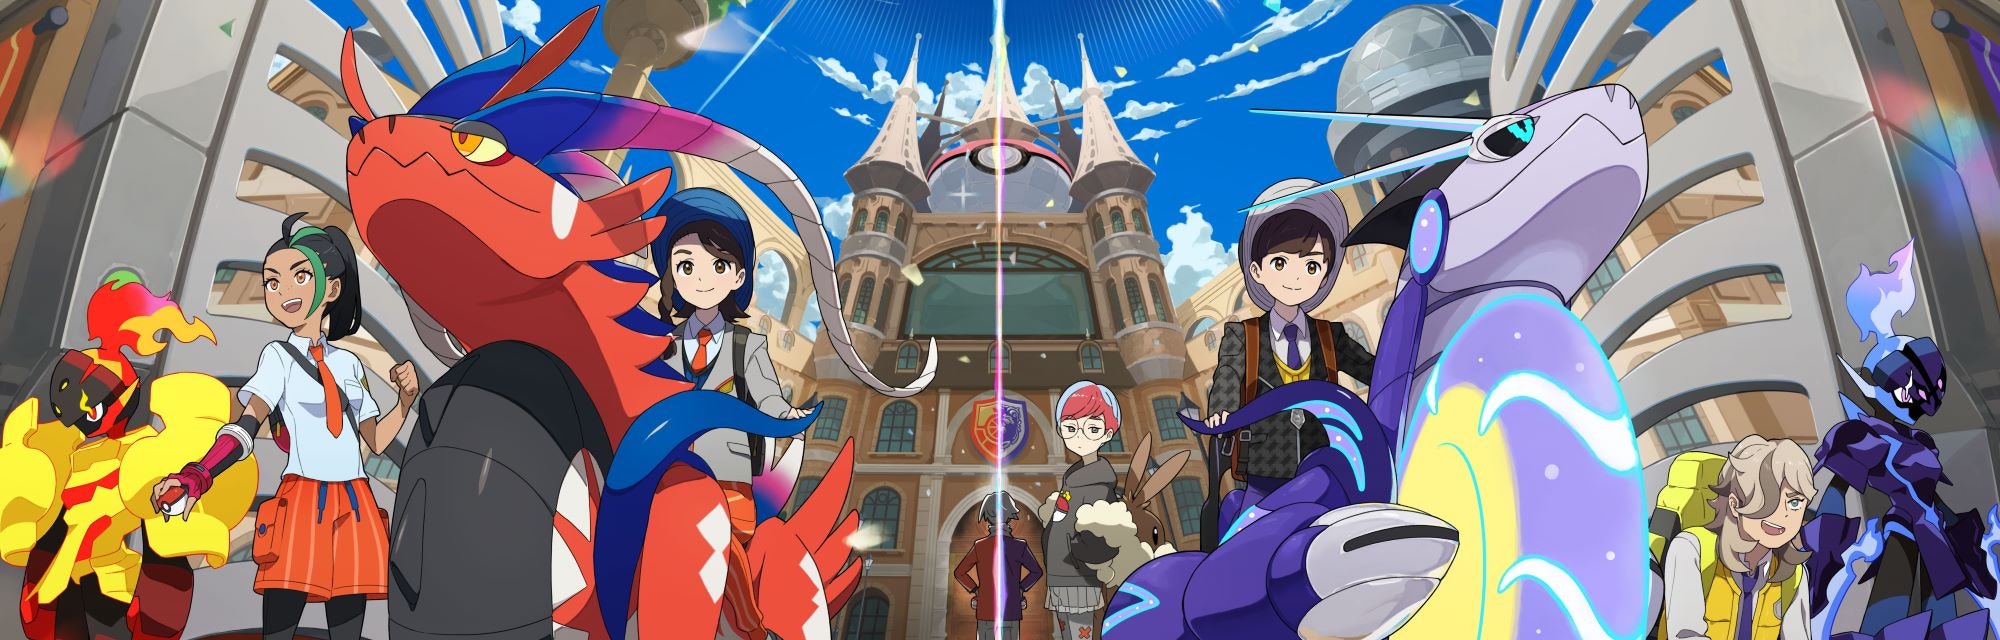 Pokemon Scarlet and Violet protagonists posed with cast and legendaries